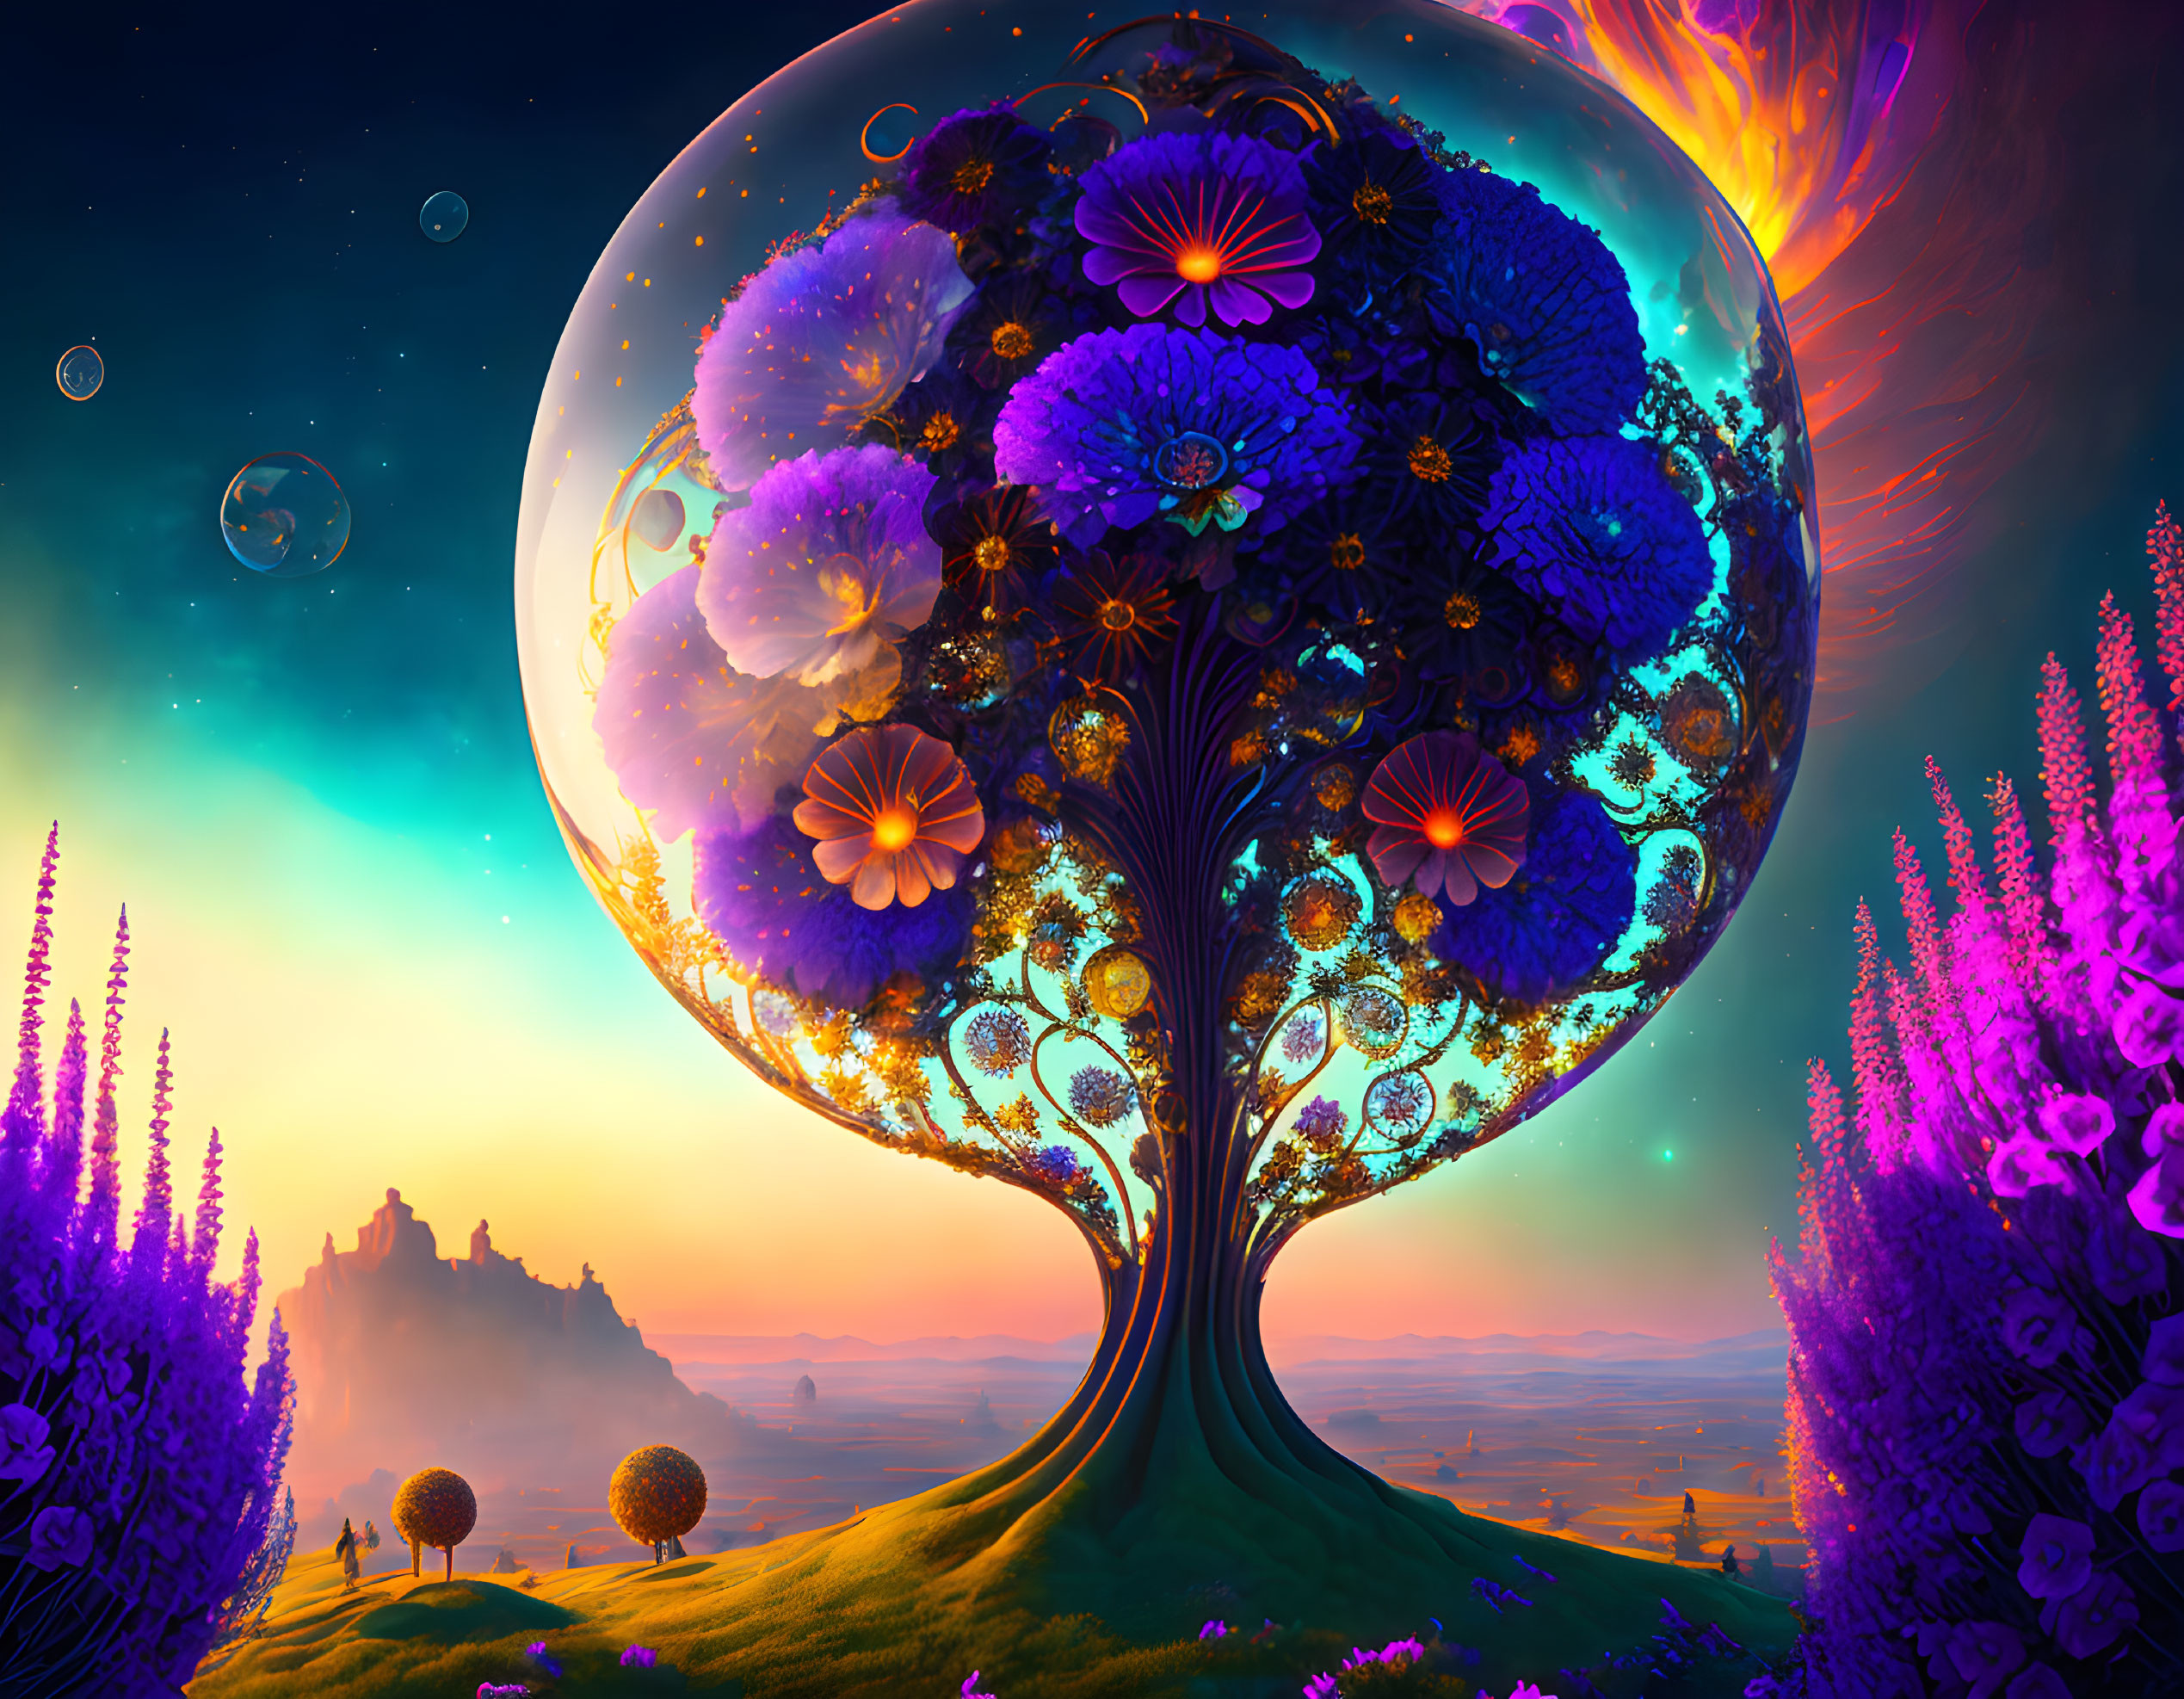 Fantastical tree with luminescent flowers under large moon in surreal landscape